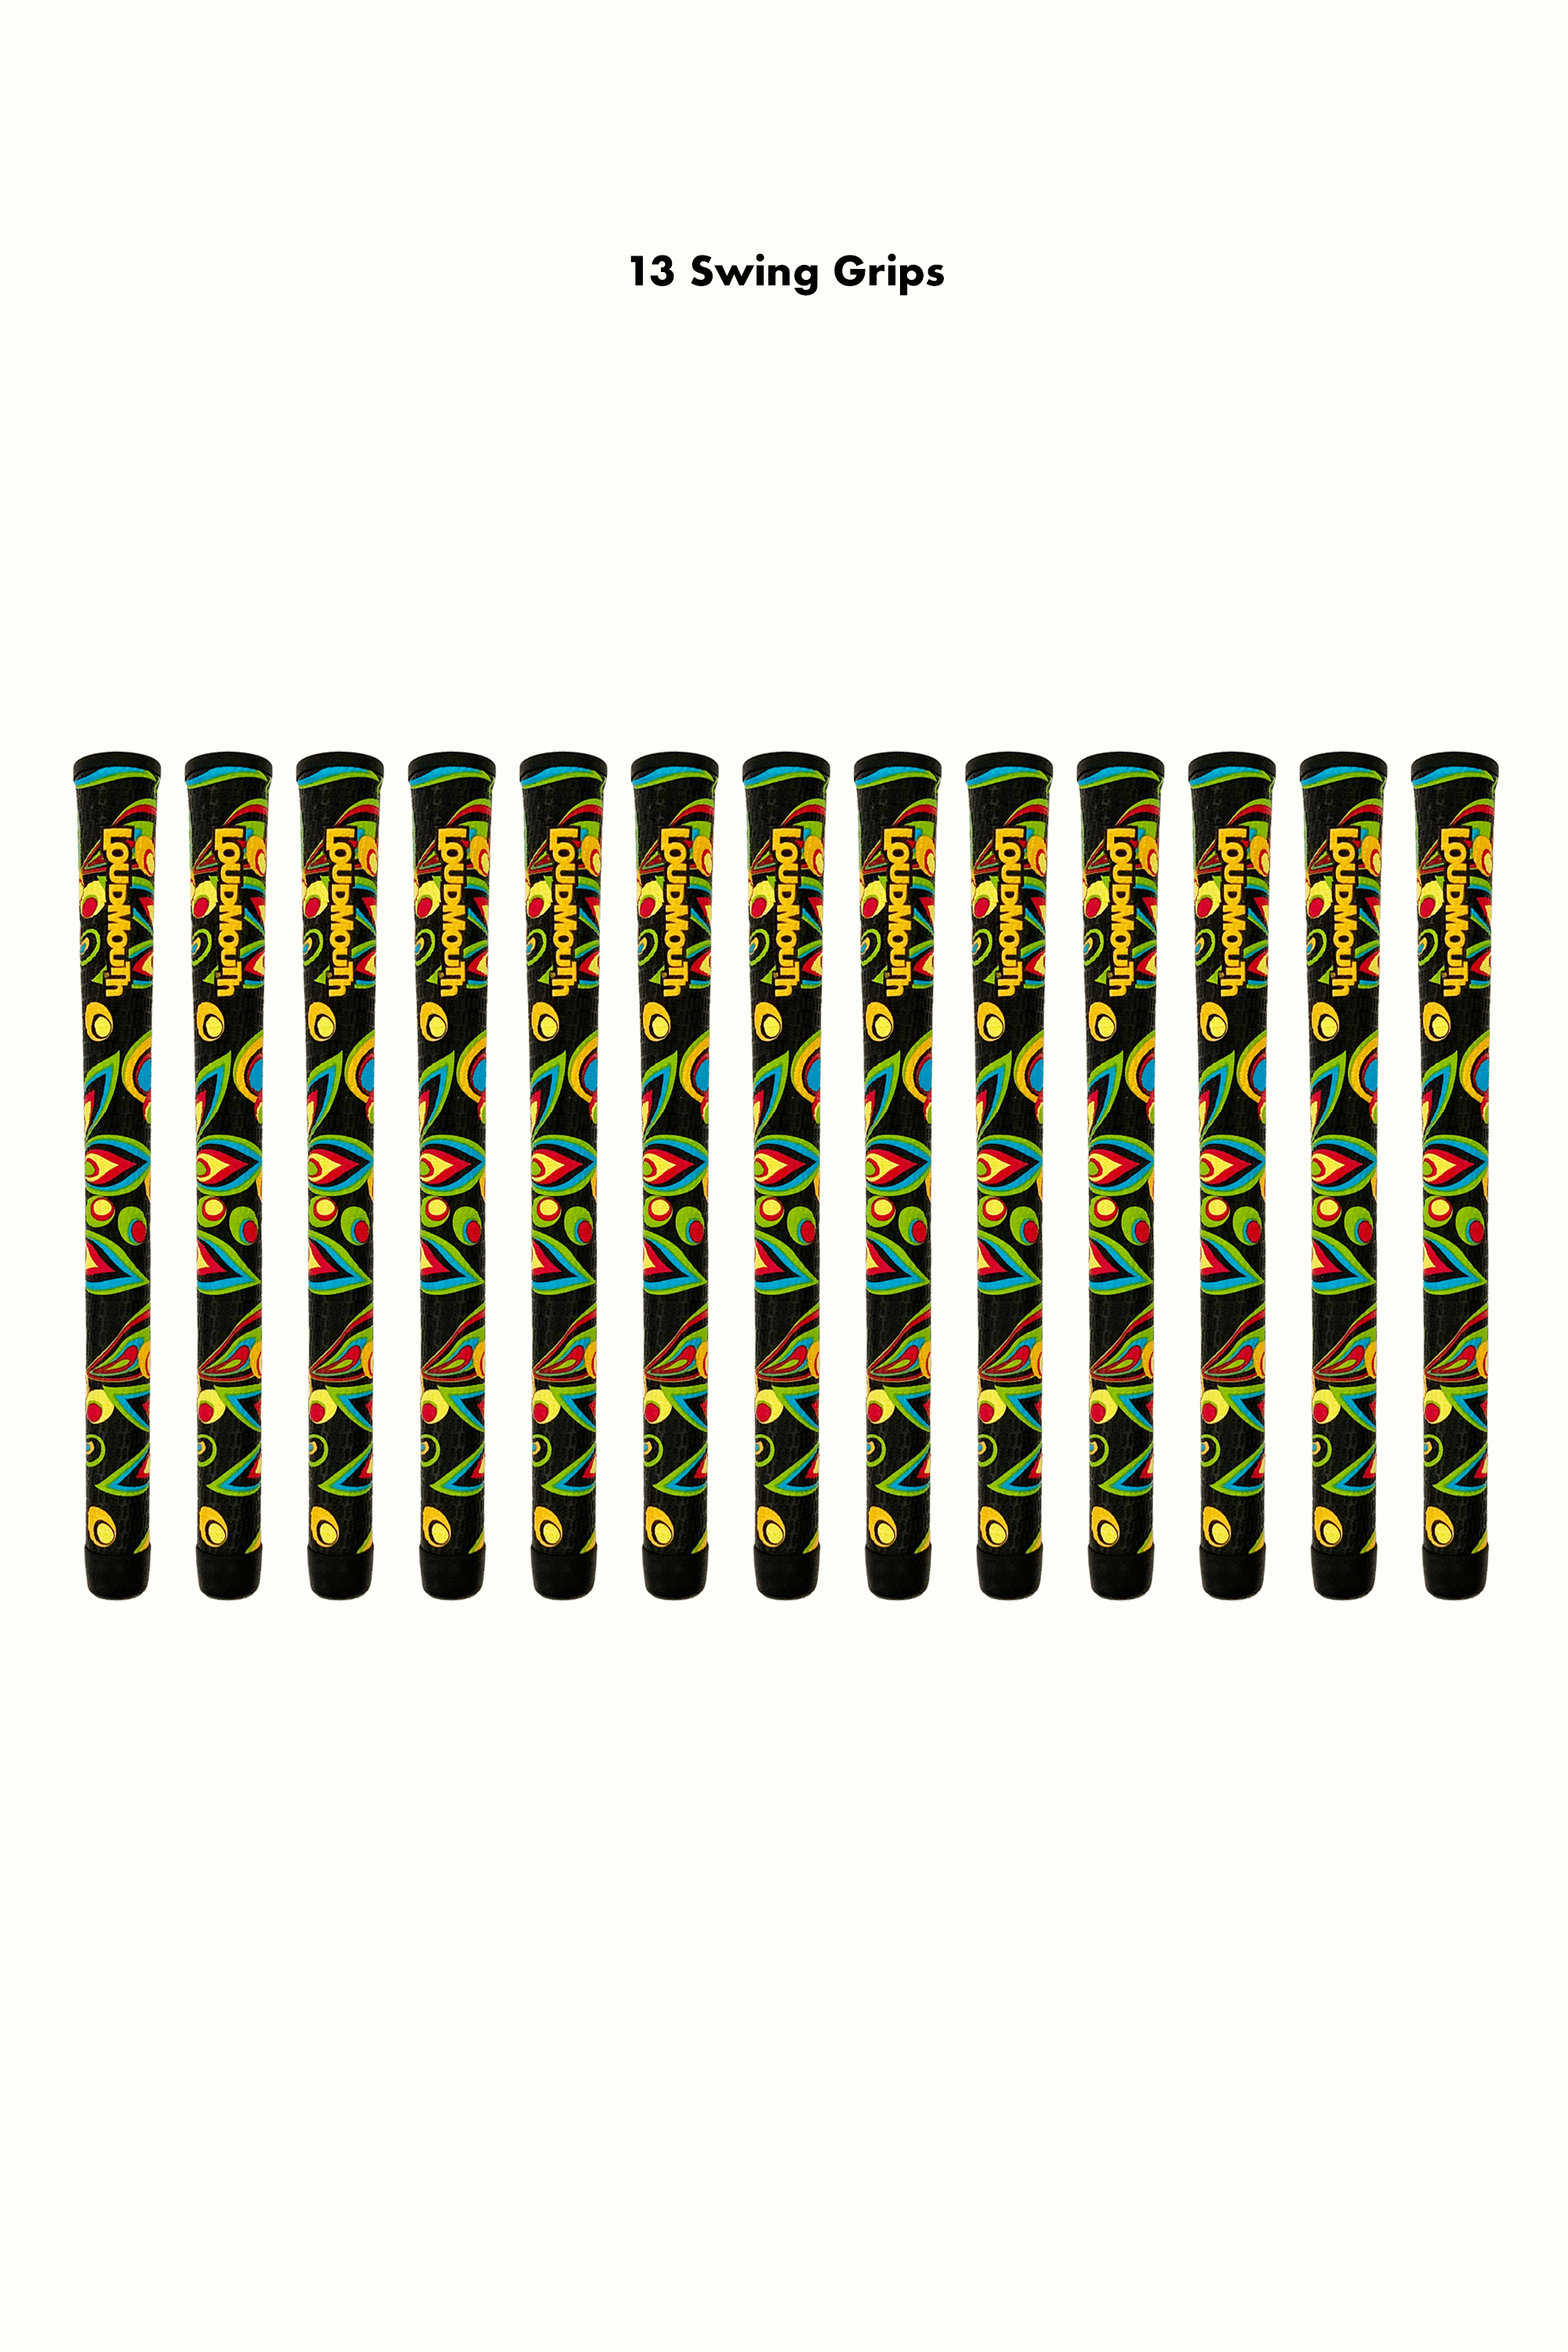 Thirteen swing grips with the Loudmouth logo and shagadelic print